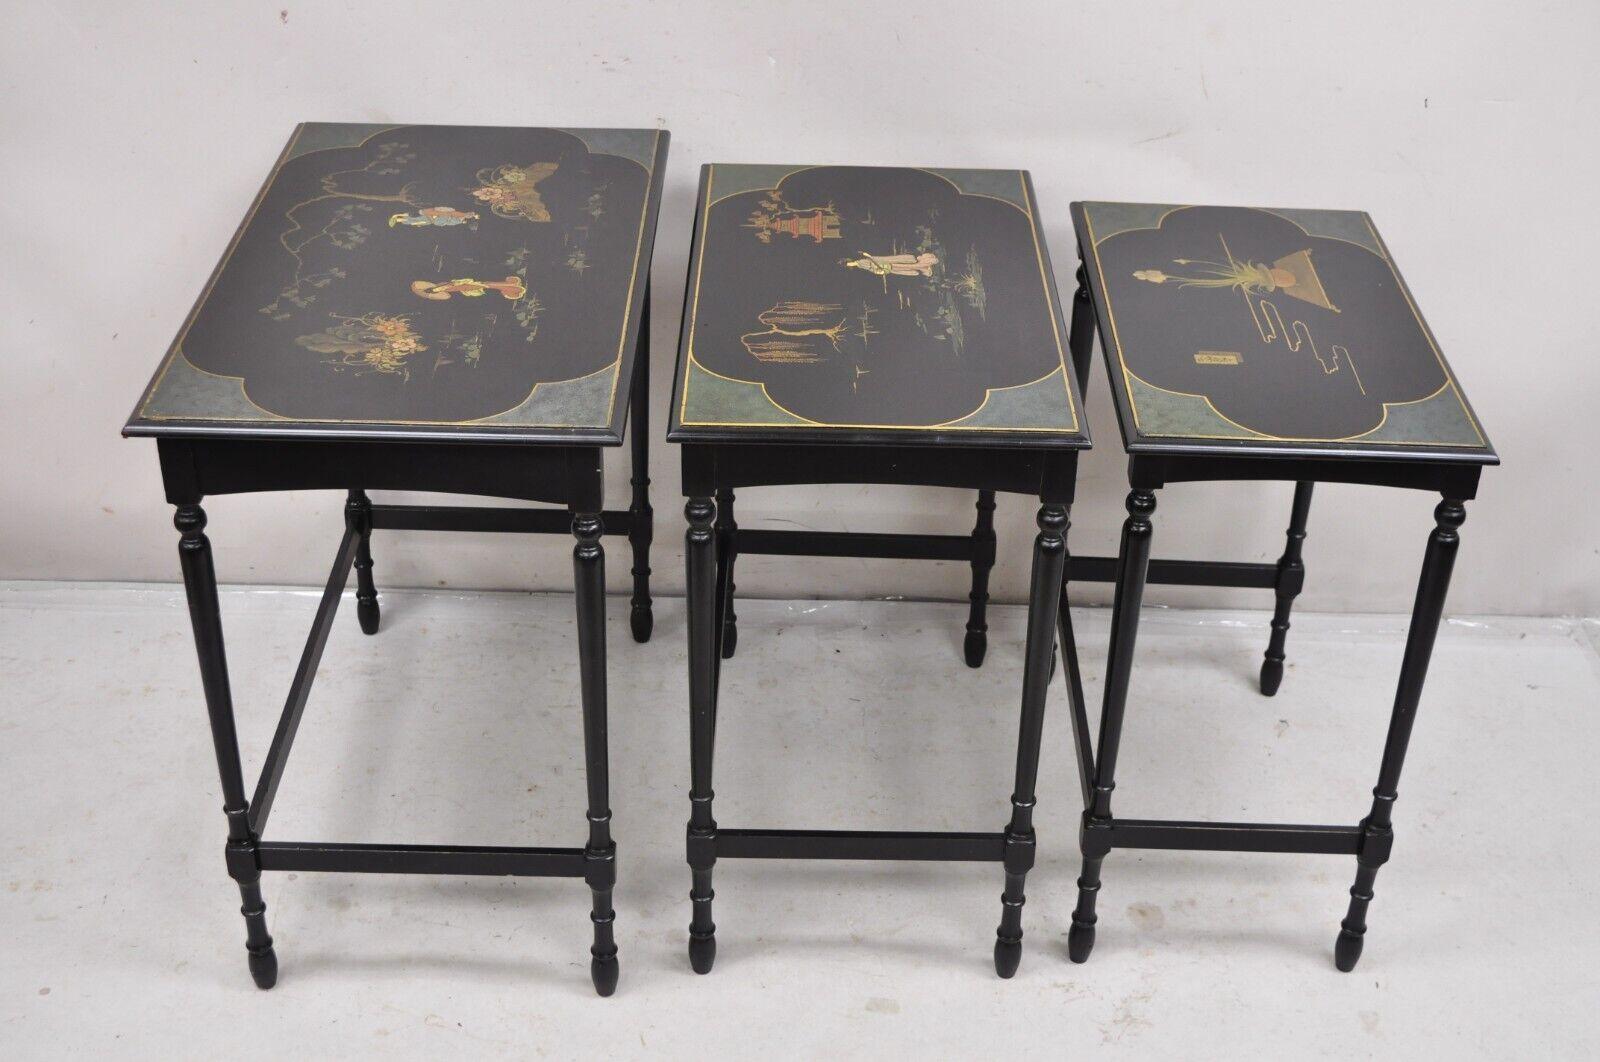 Vtg Chinoiserie Asian Inspired Black Nesting Side Tables by Paalman - Set of 3 For Sale 7